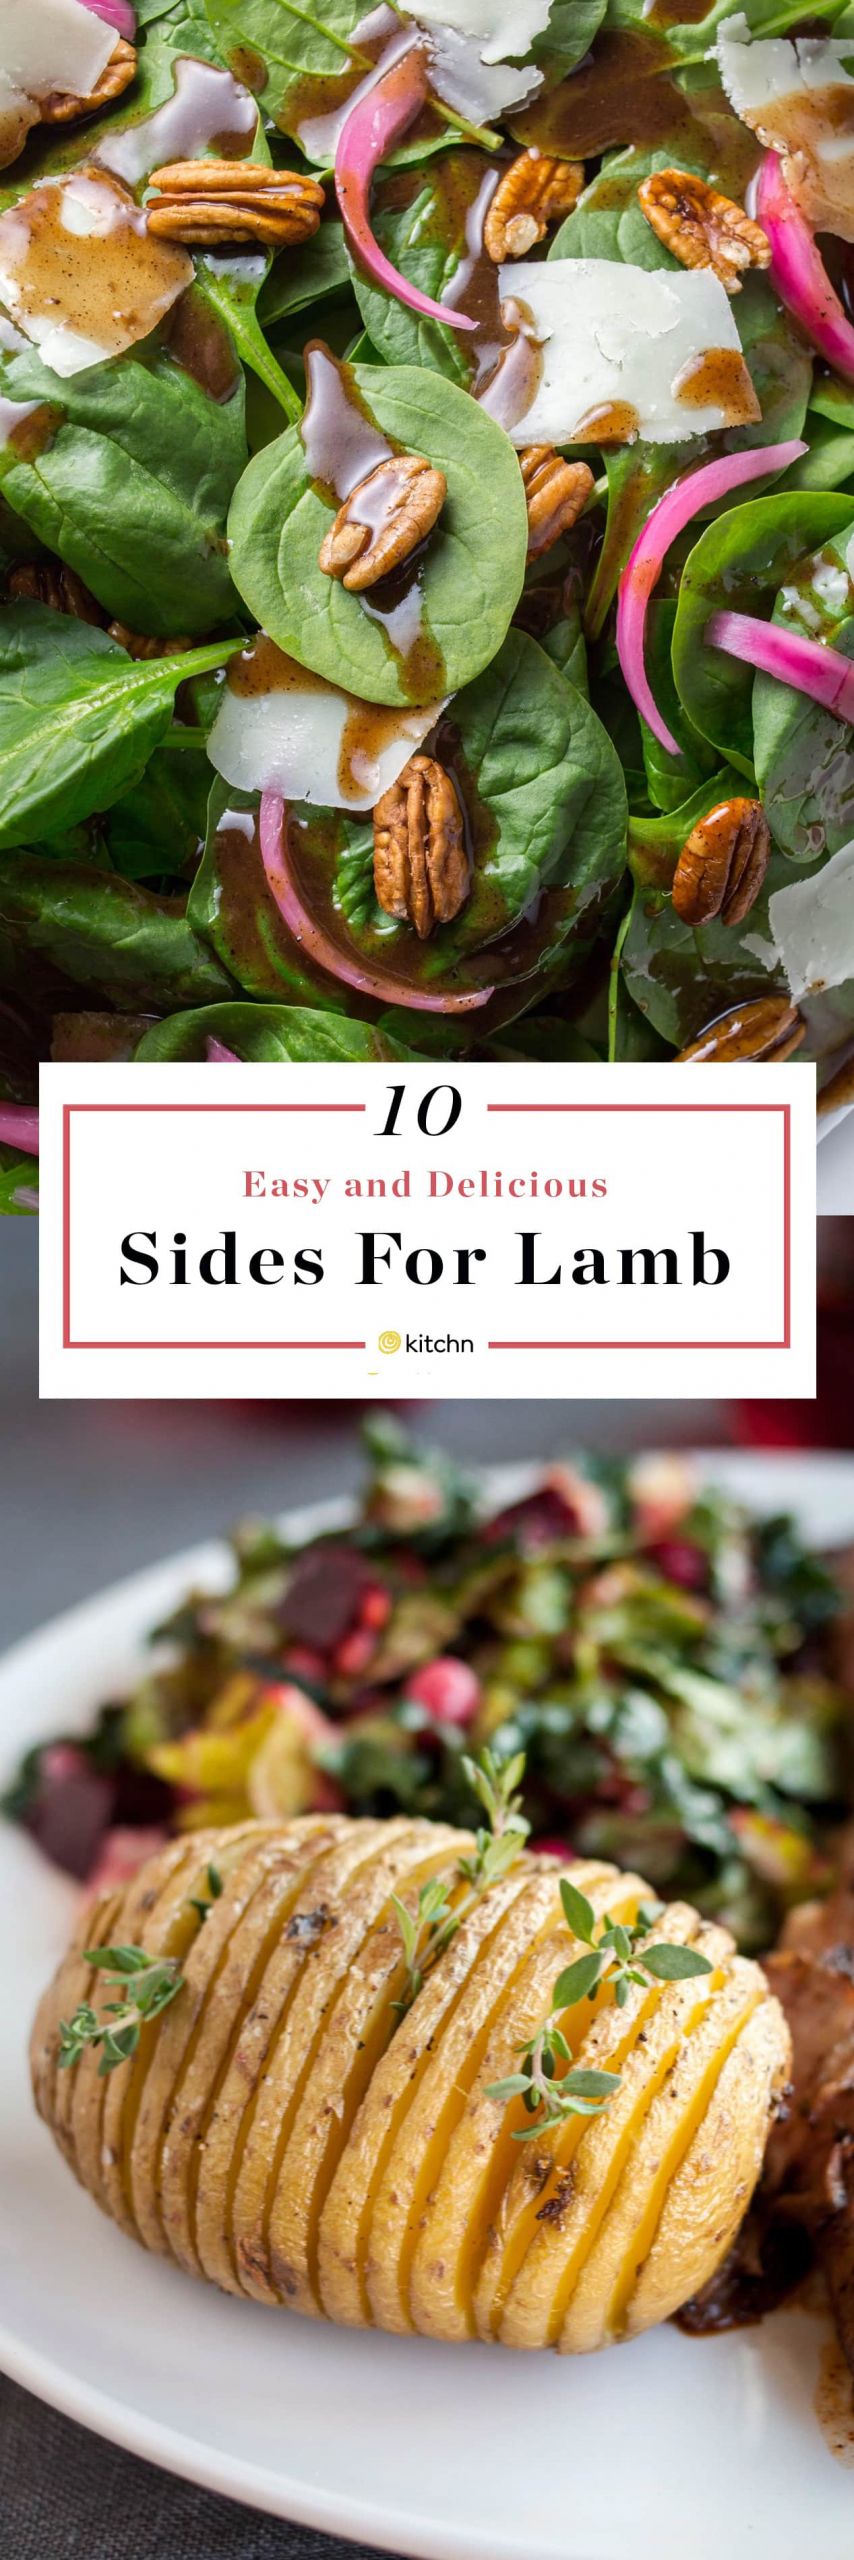 Side Dishes With Lamb
 10 Side Dish Recipes That Are Perfect with Lamb